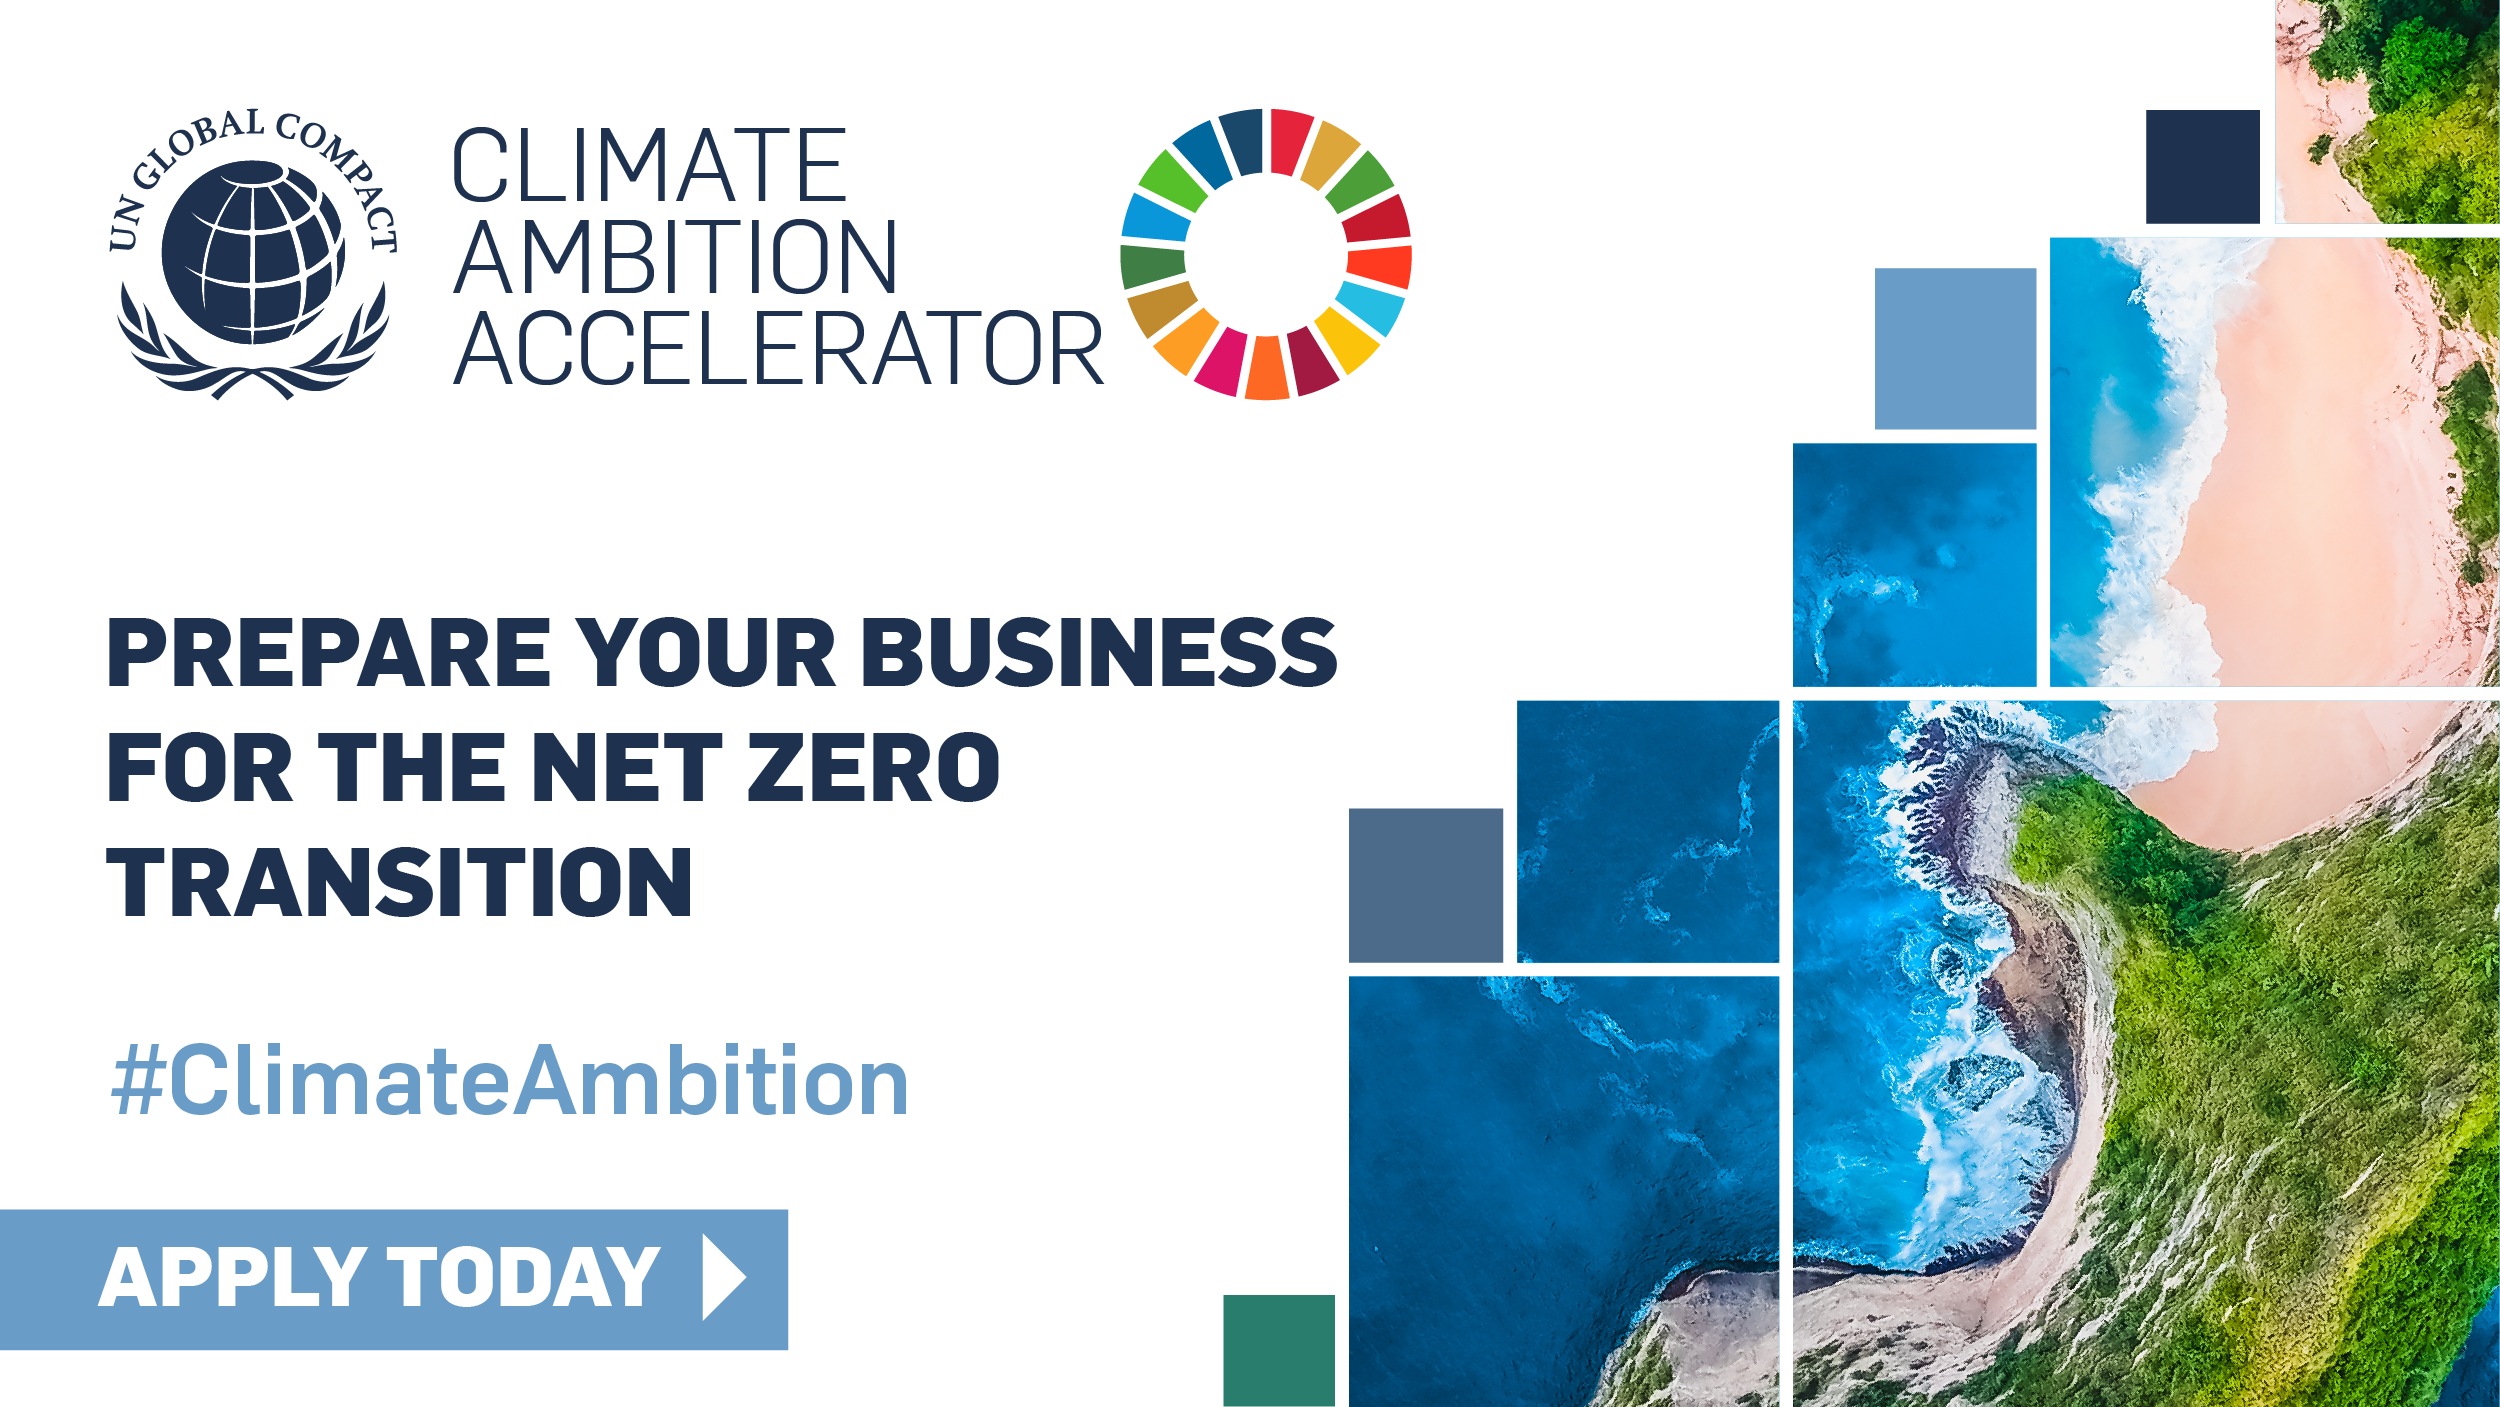 The UN Global Compact’s Climate Ambition Accelerator programme has begun, with 25 Finnish companies of different sizes and sectors participating. 